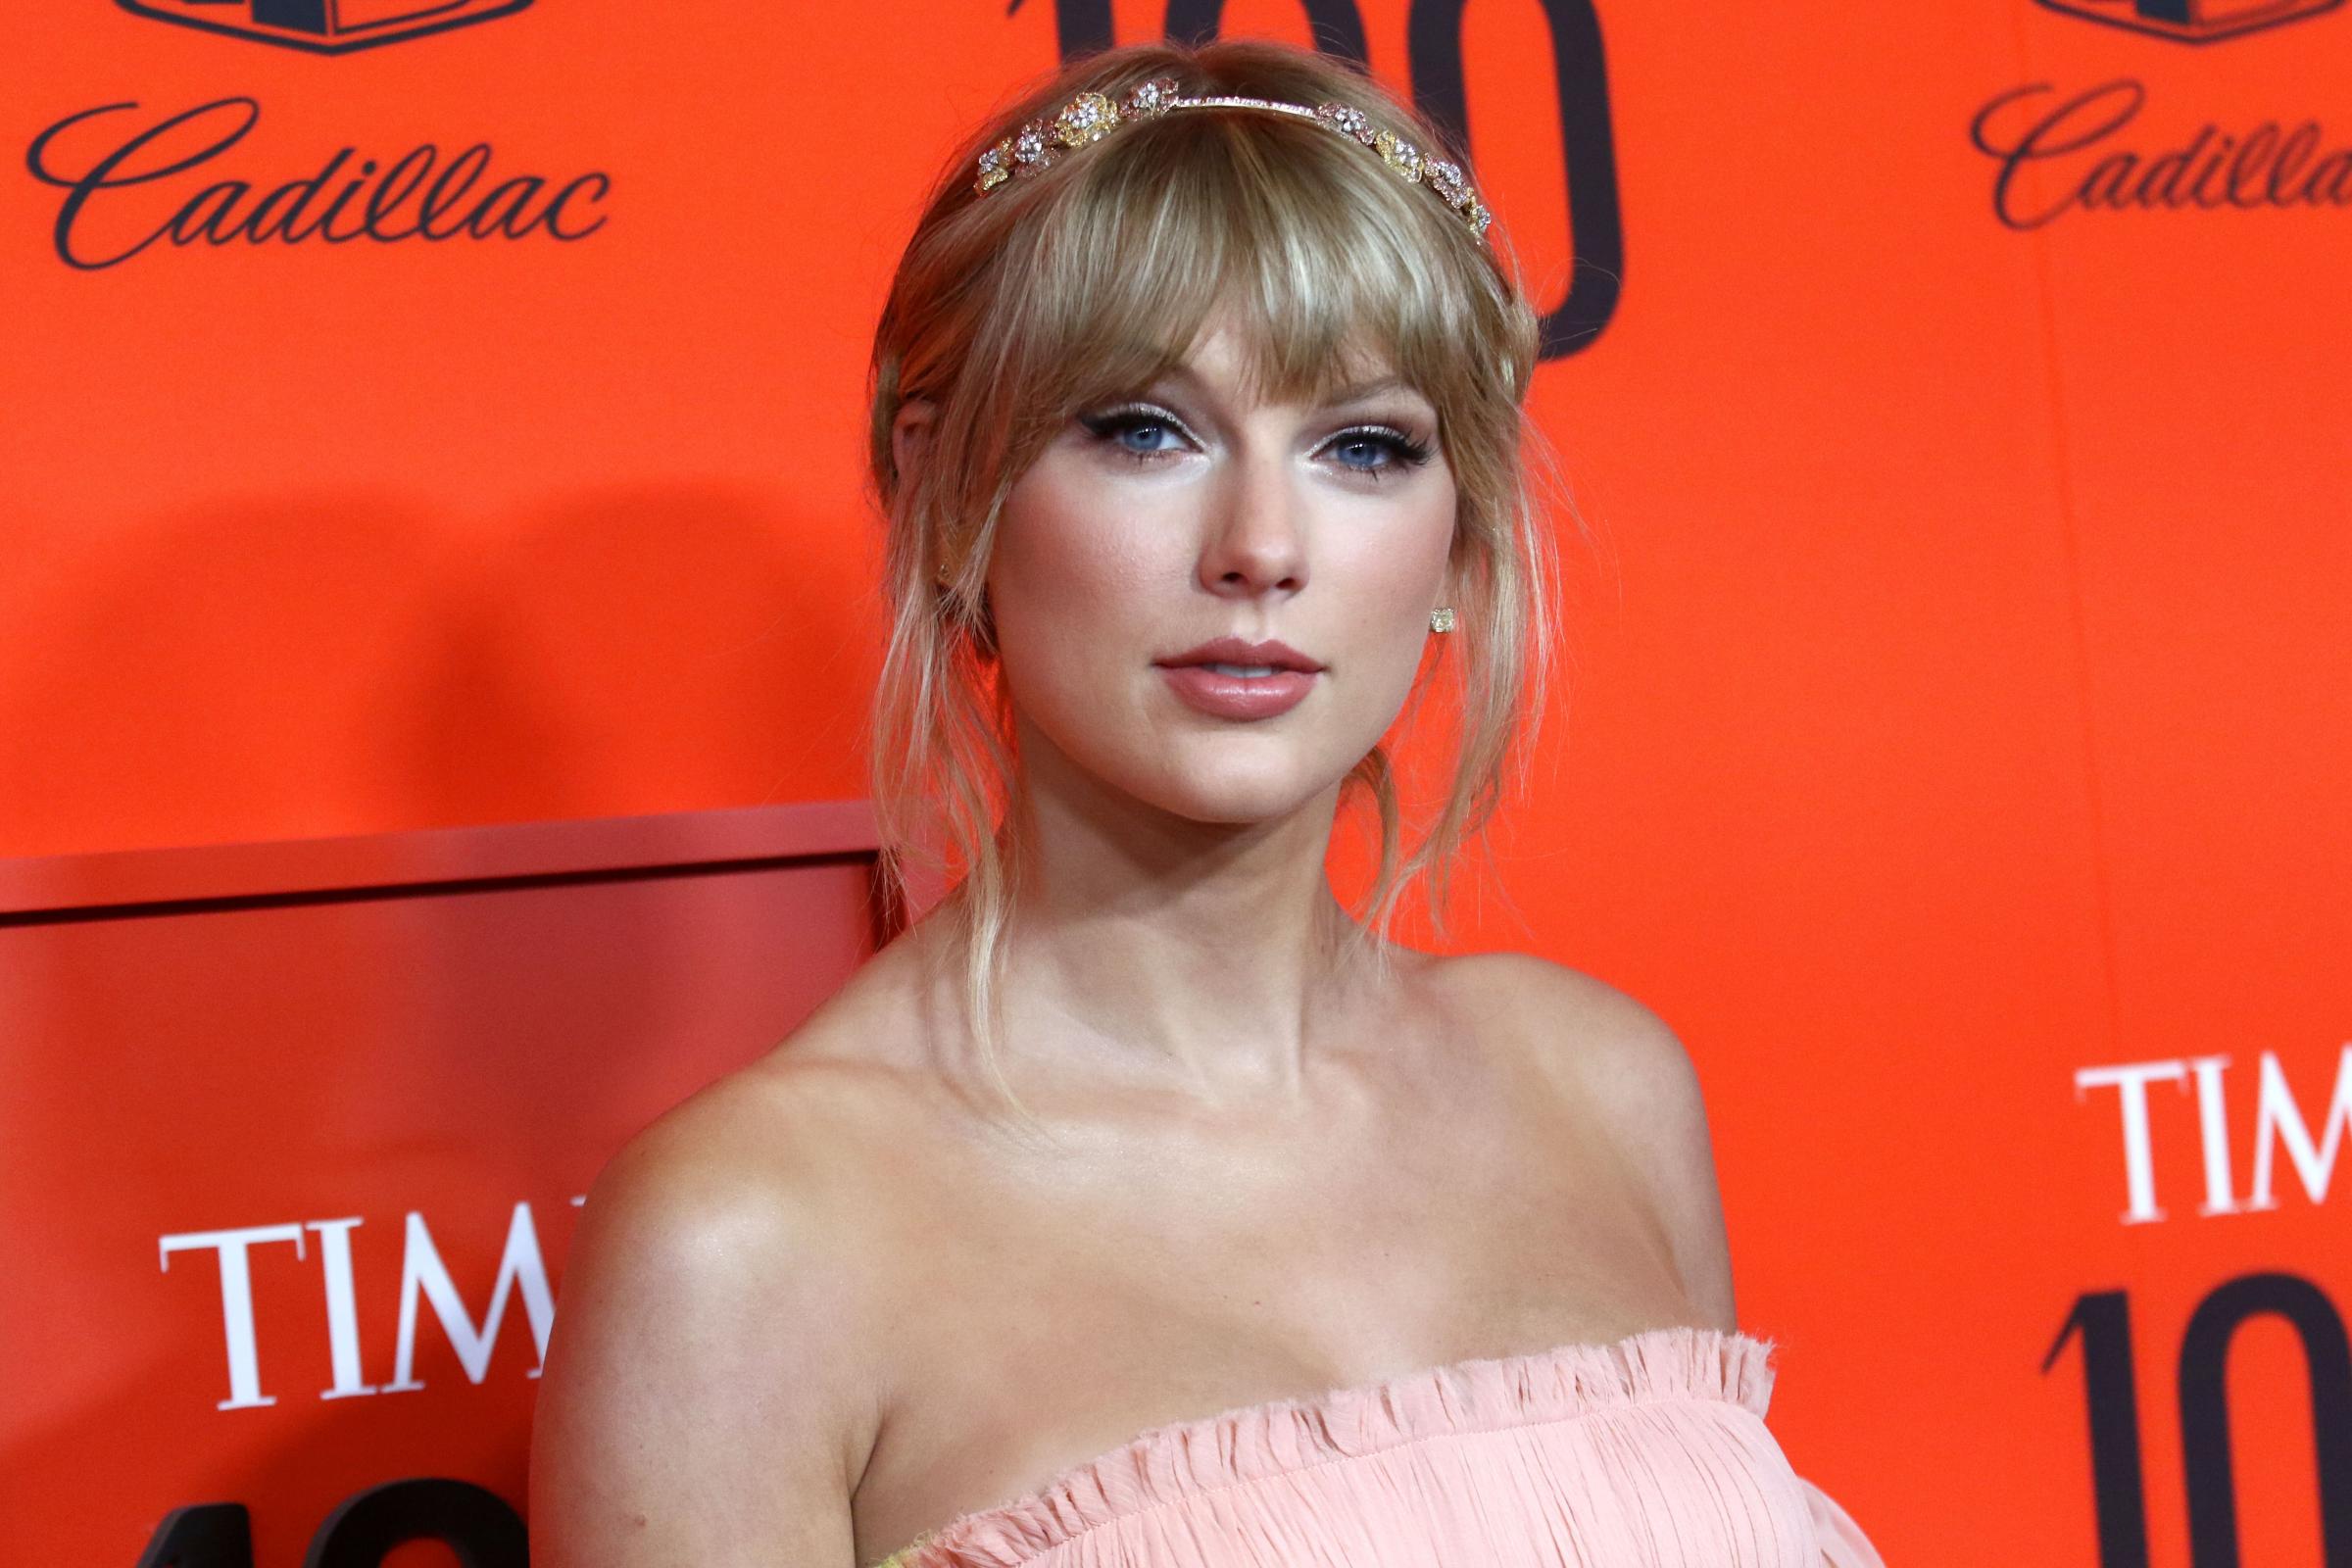 Taylor Swift’s former record label appears to allow her to perform old songs